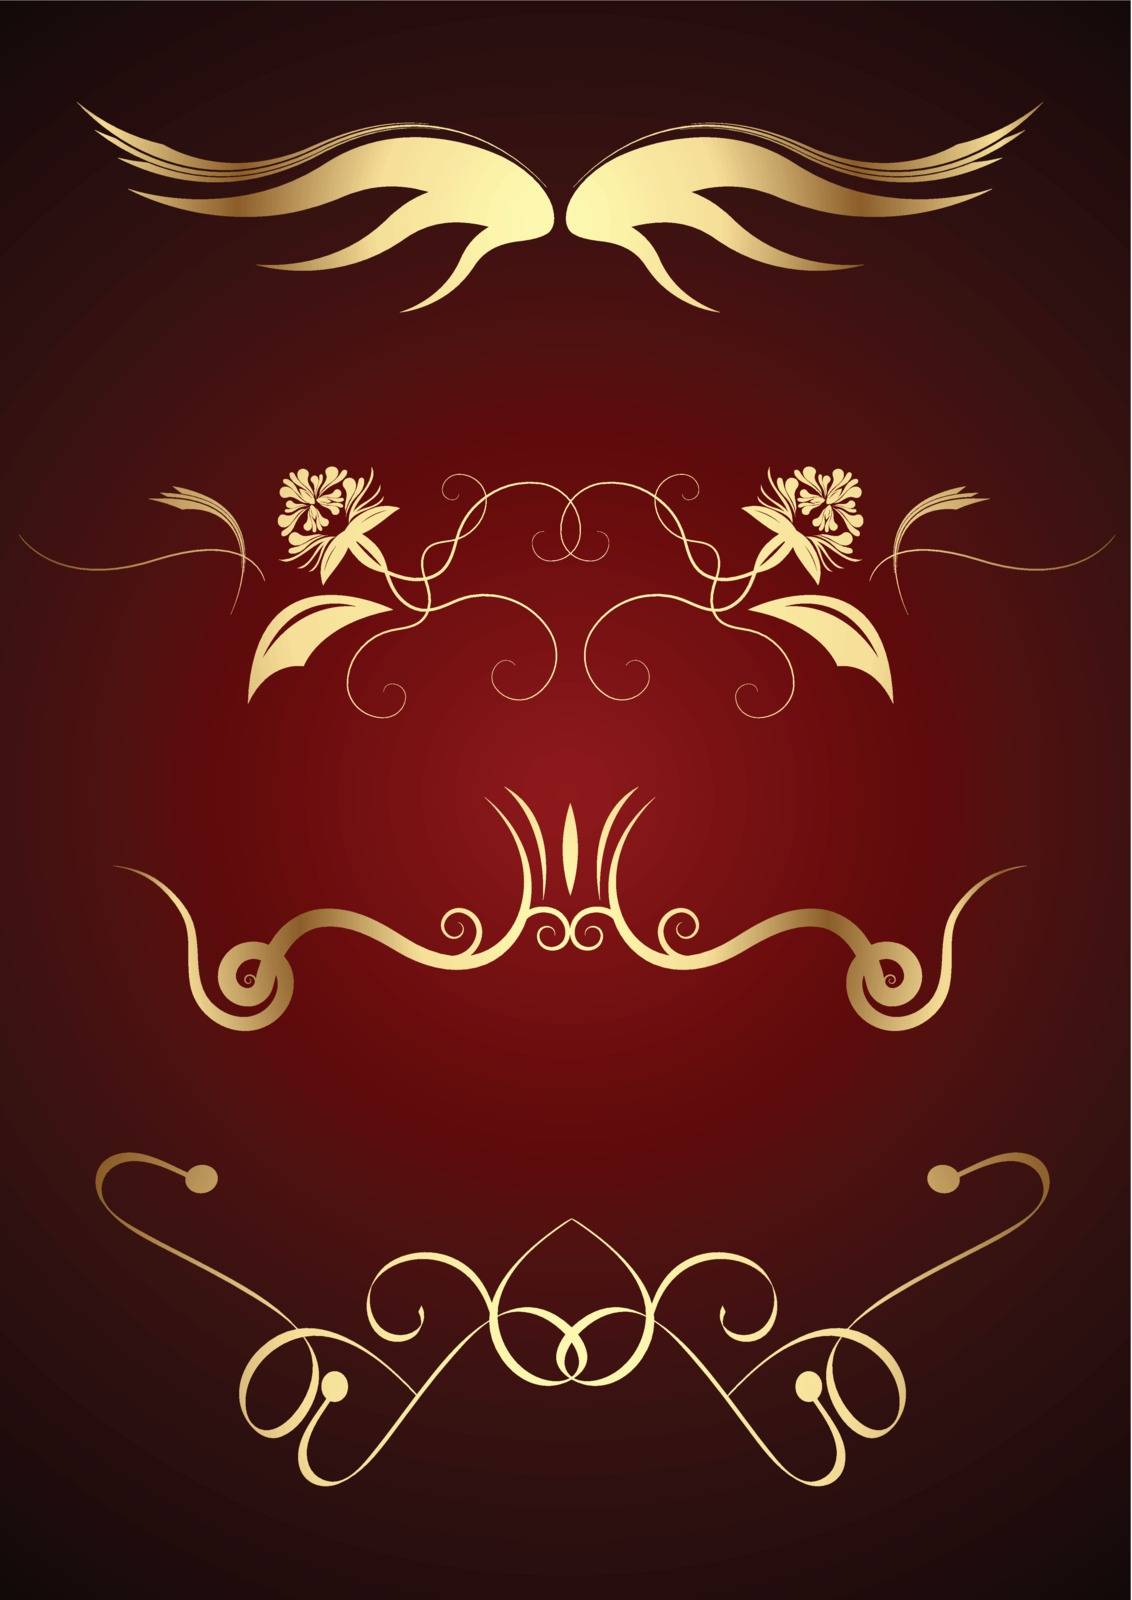 Editable vector golden graphic design elements on dark red background. Easy to change colors.